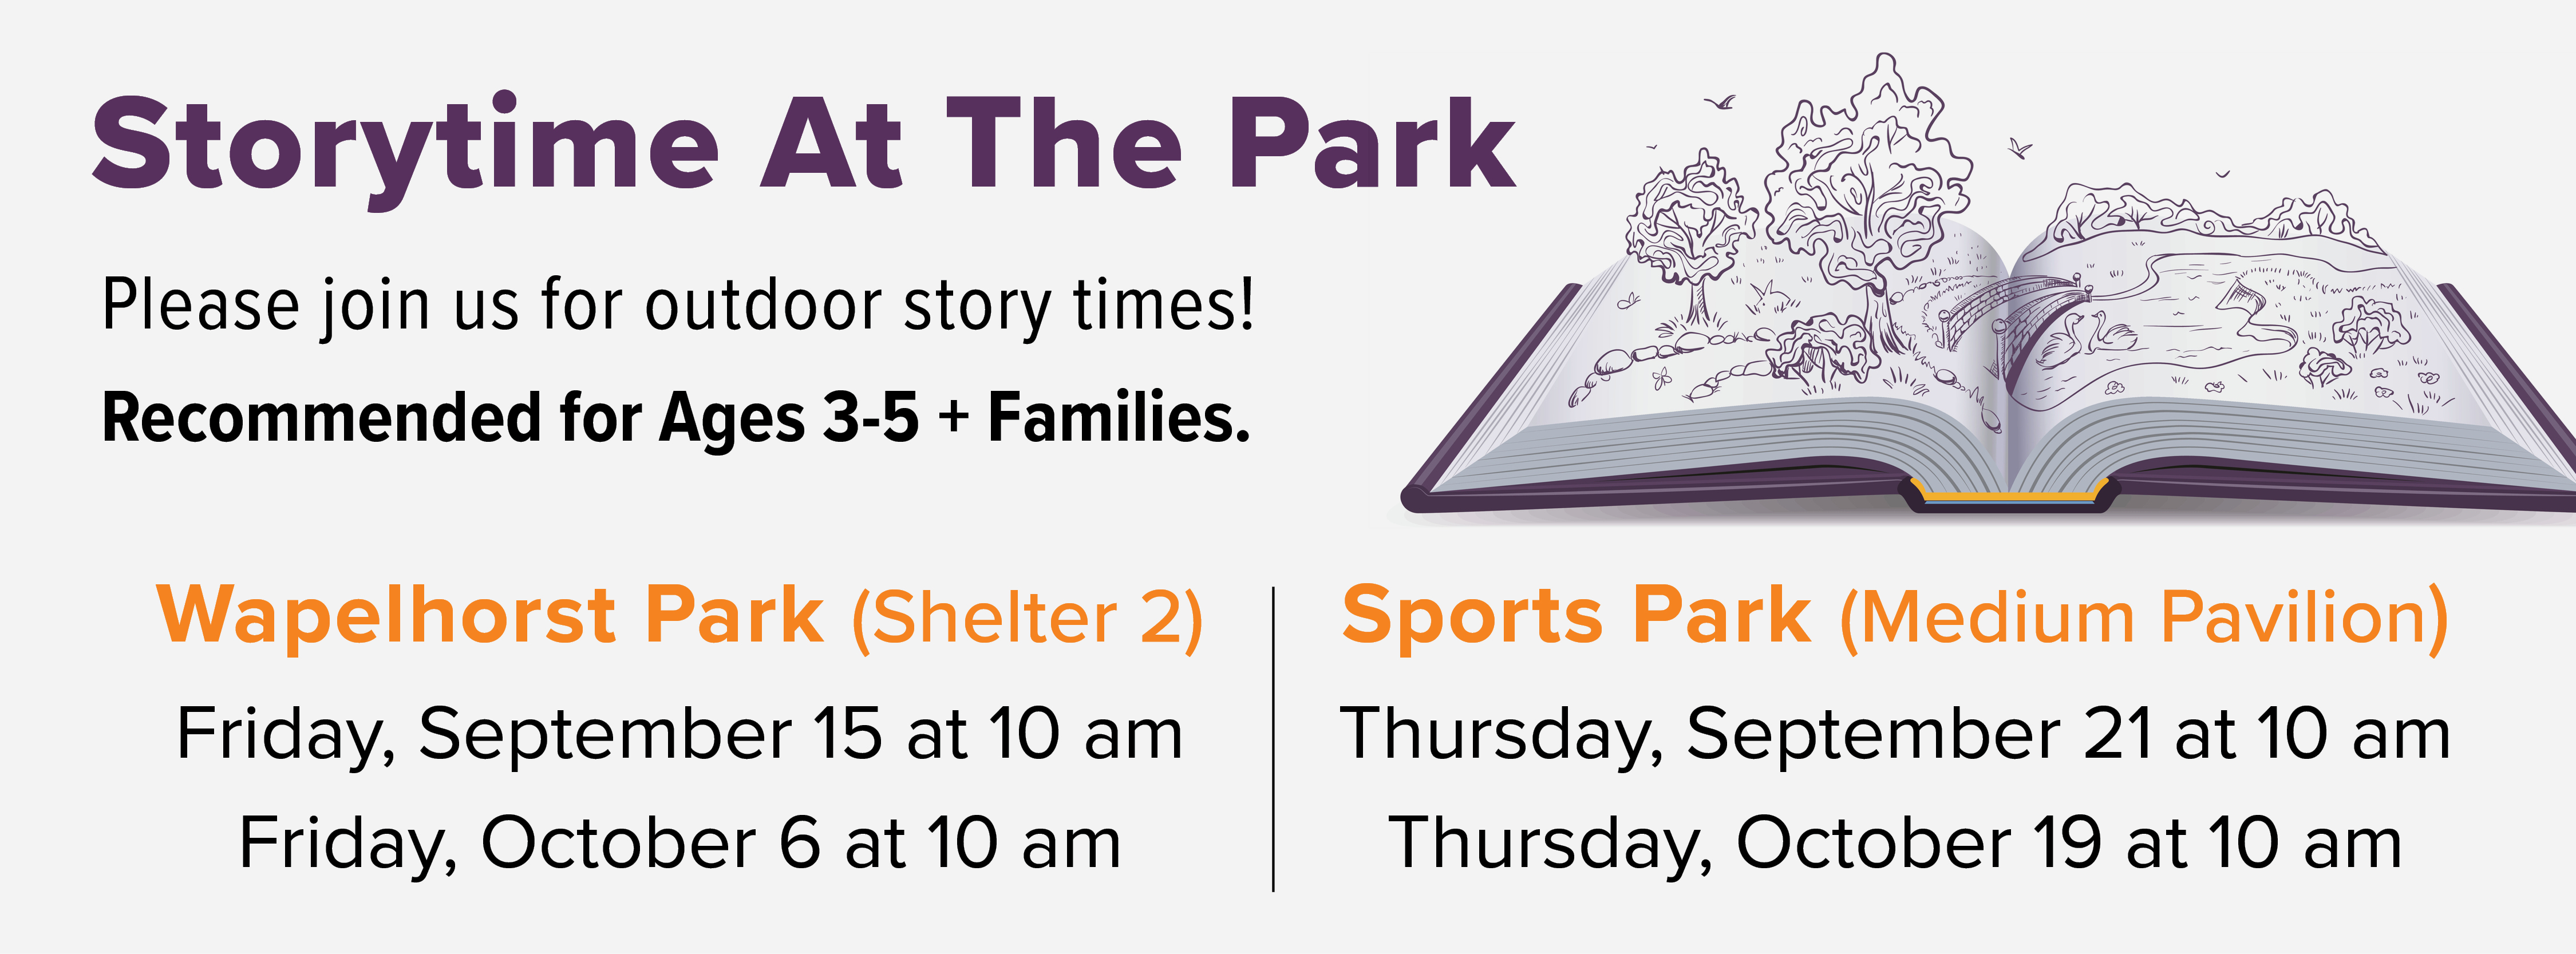 Join us for outdoor story times at the park! Click for more information.